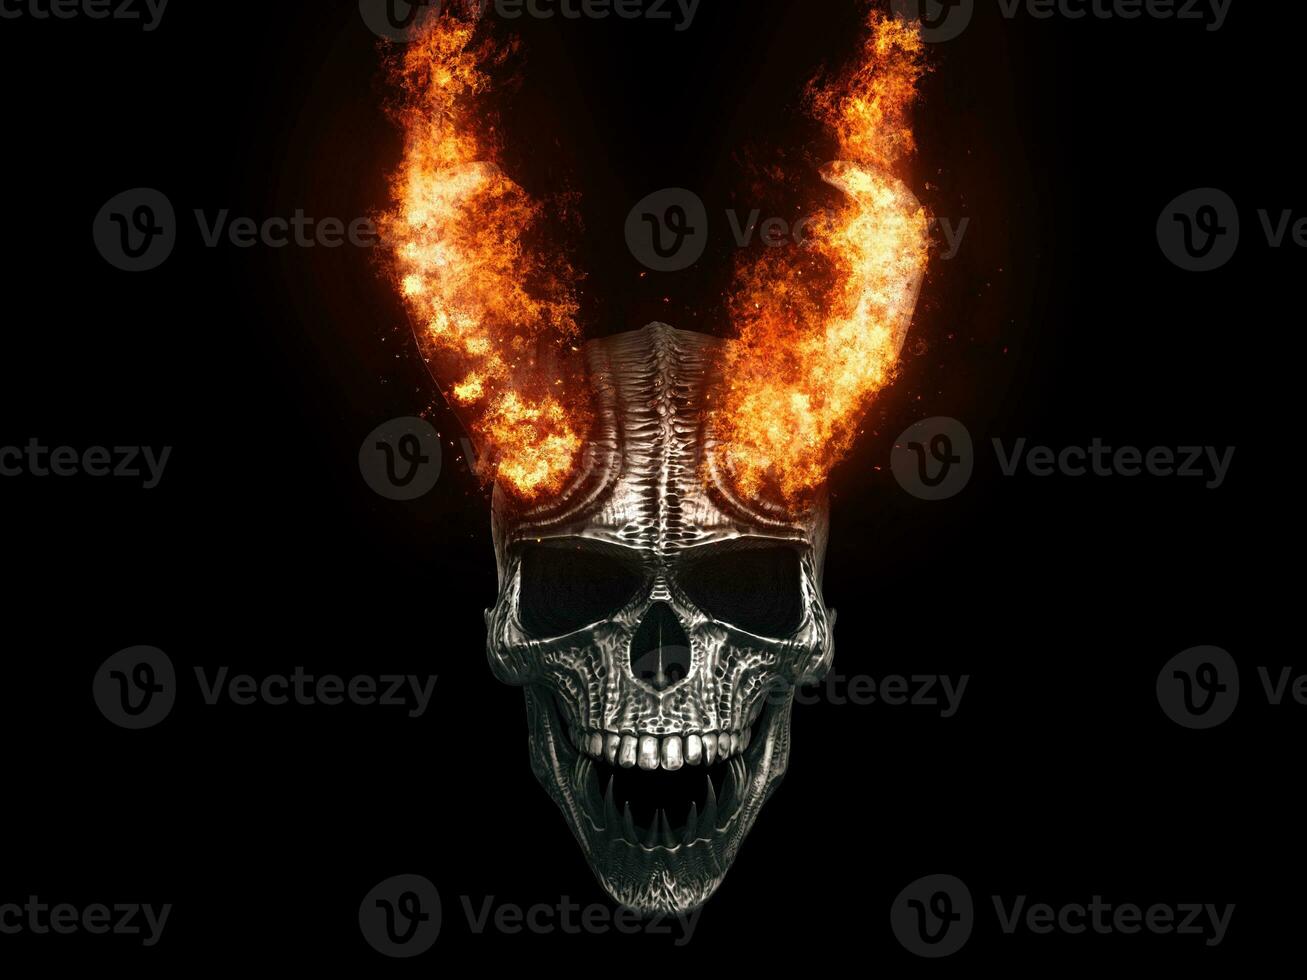 Demon skull with horns on fire - isolated on black background photo